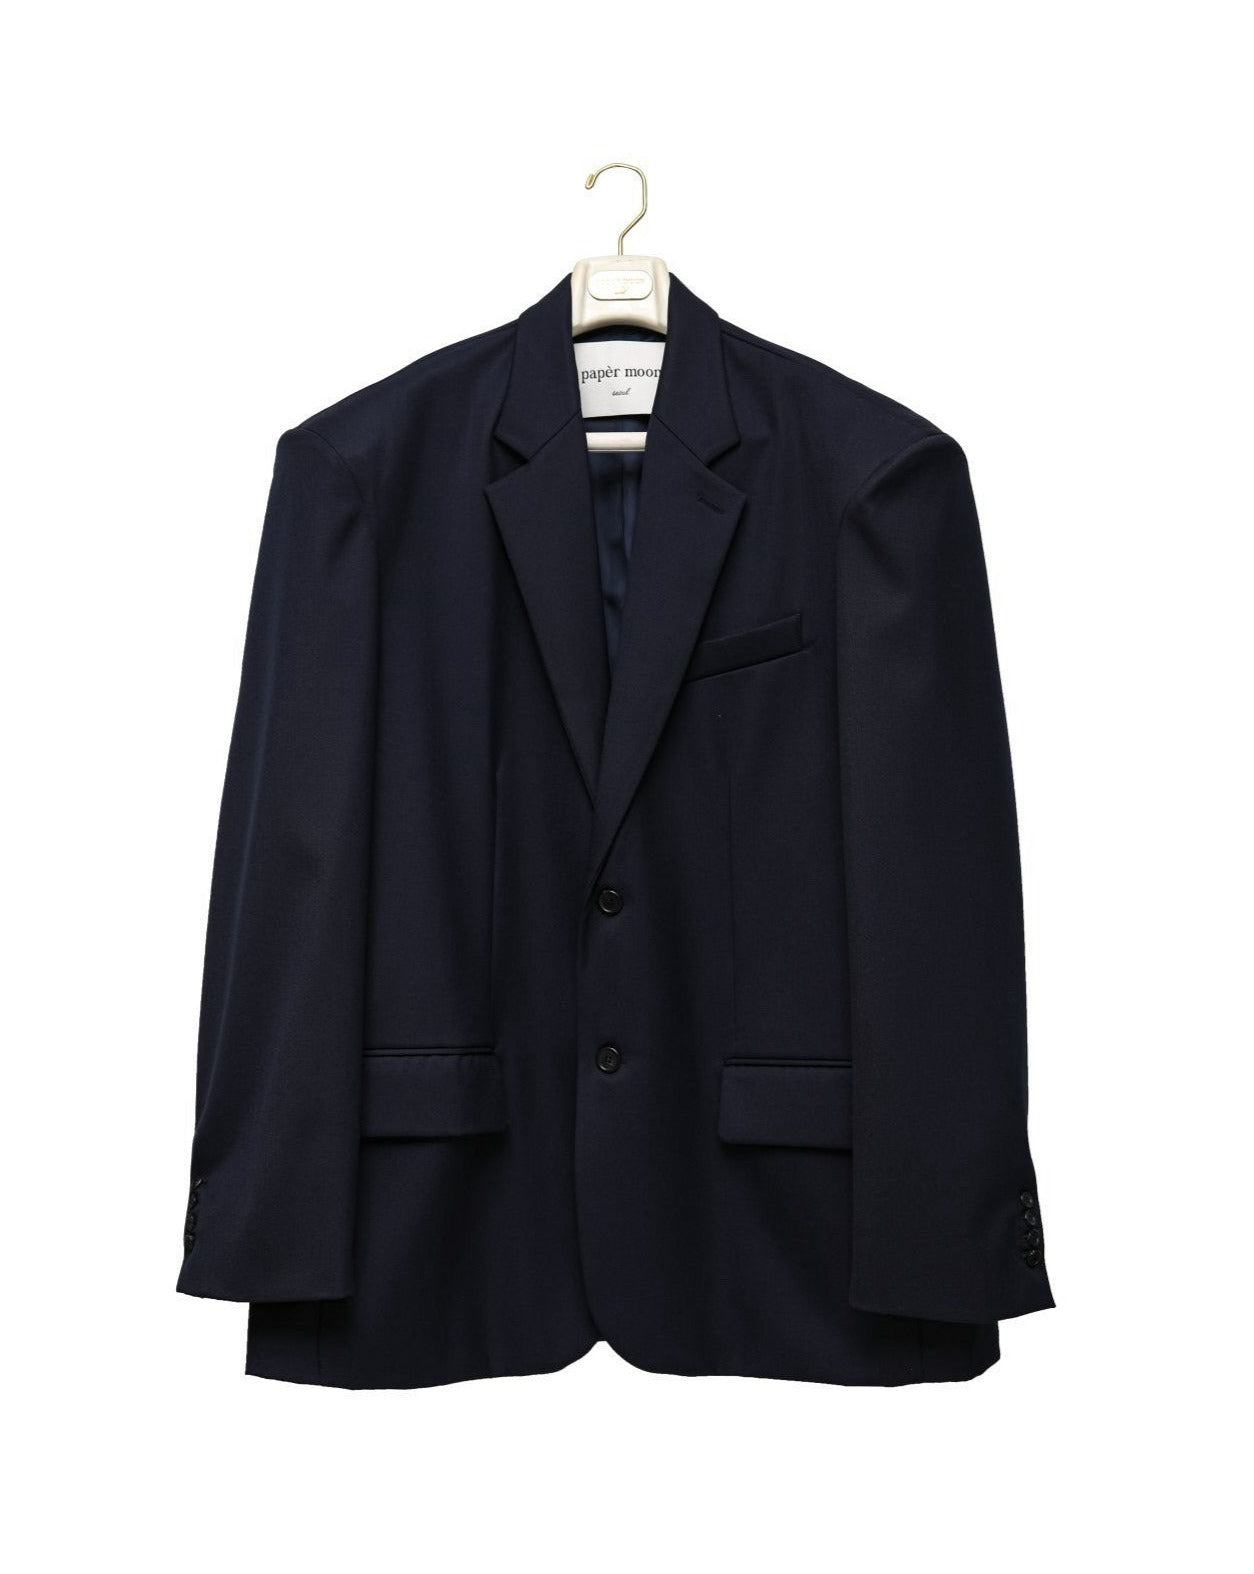 【PAPERMOON 페이퍼 문】SS / Maxi Oversized Single Breasted Two Button Blazer